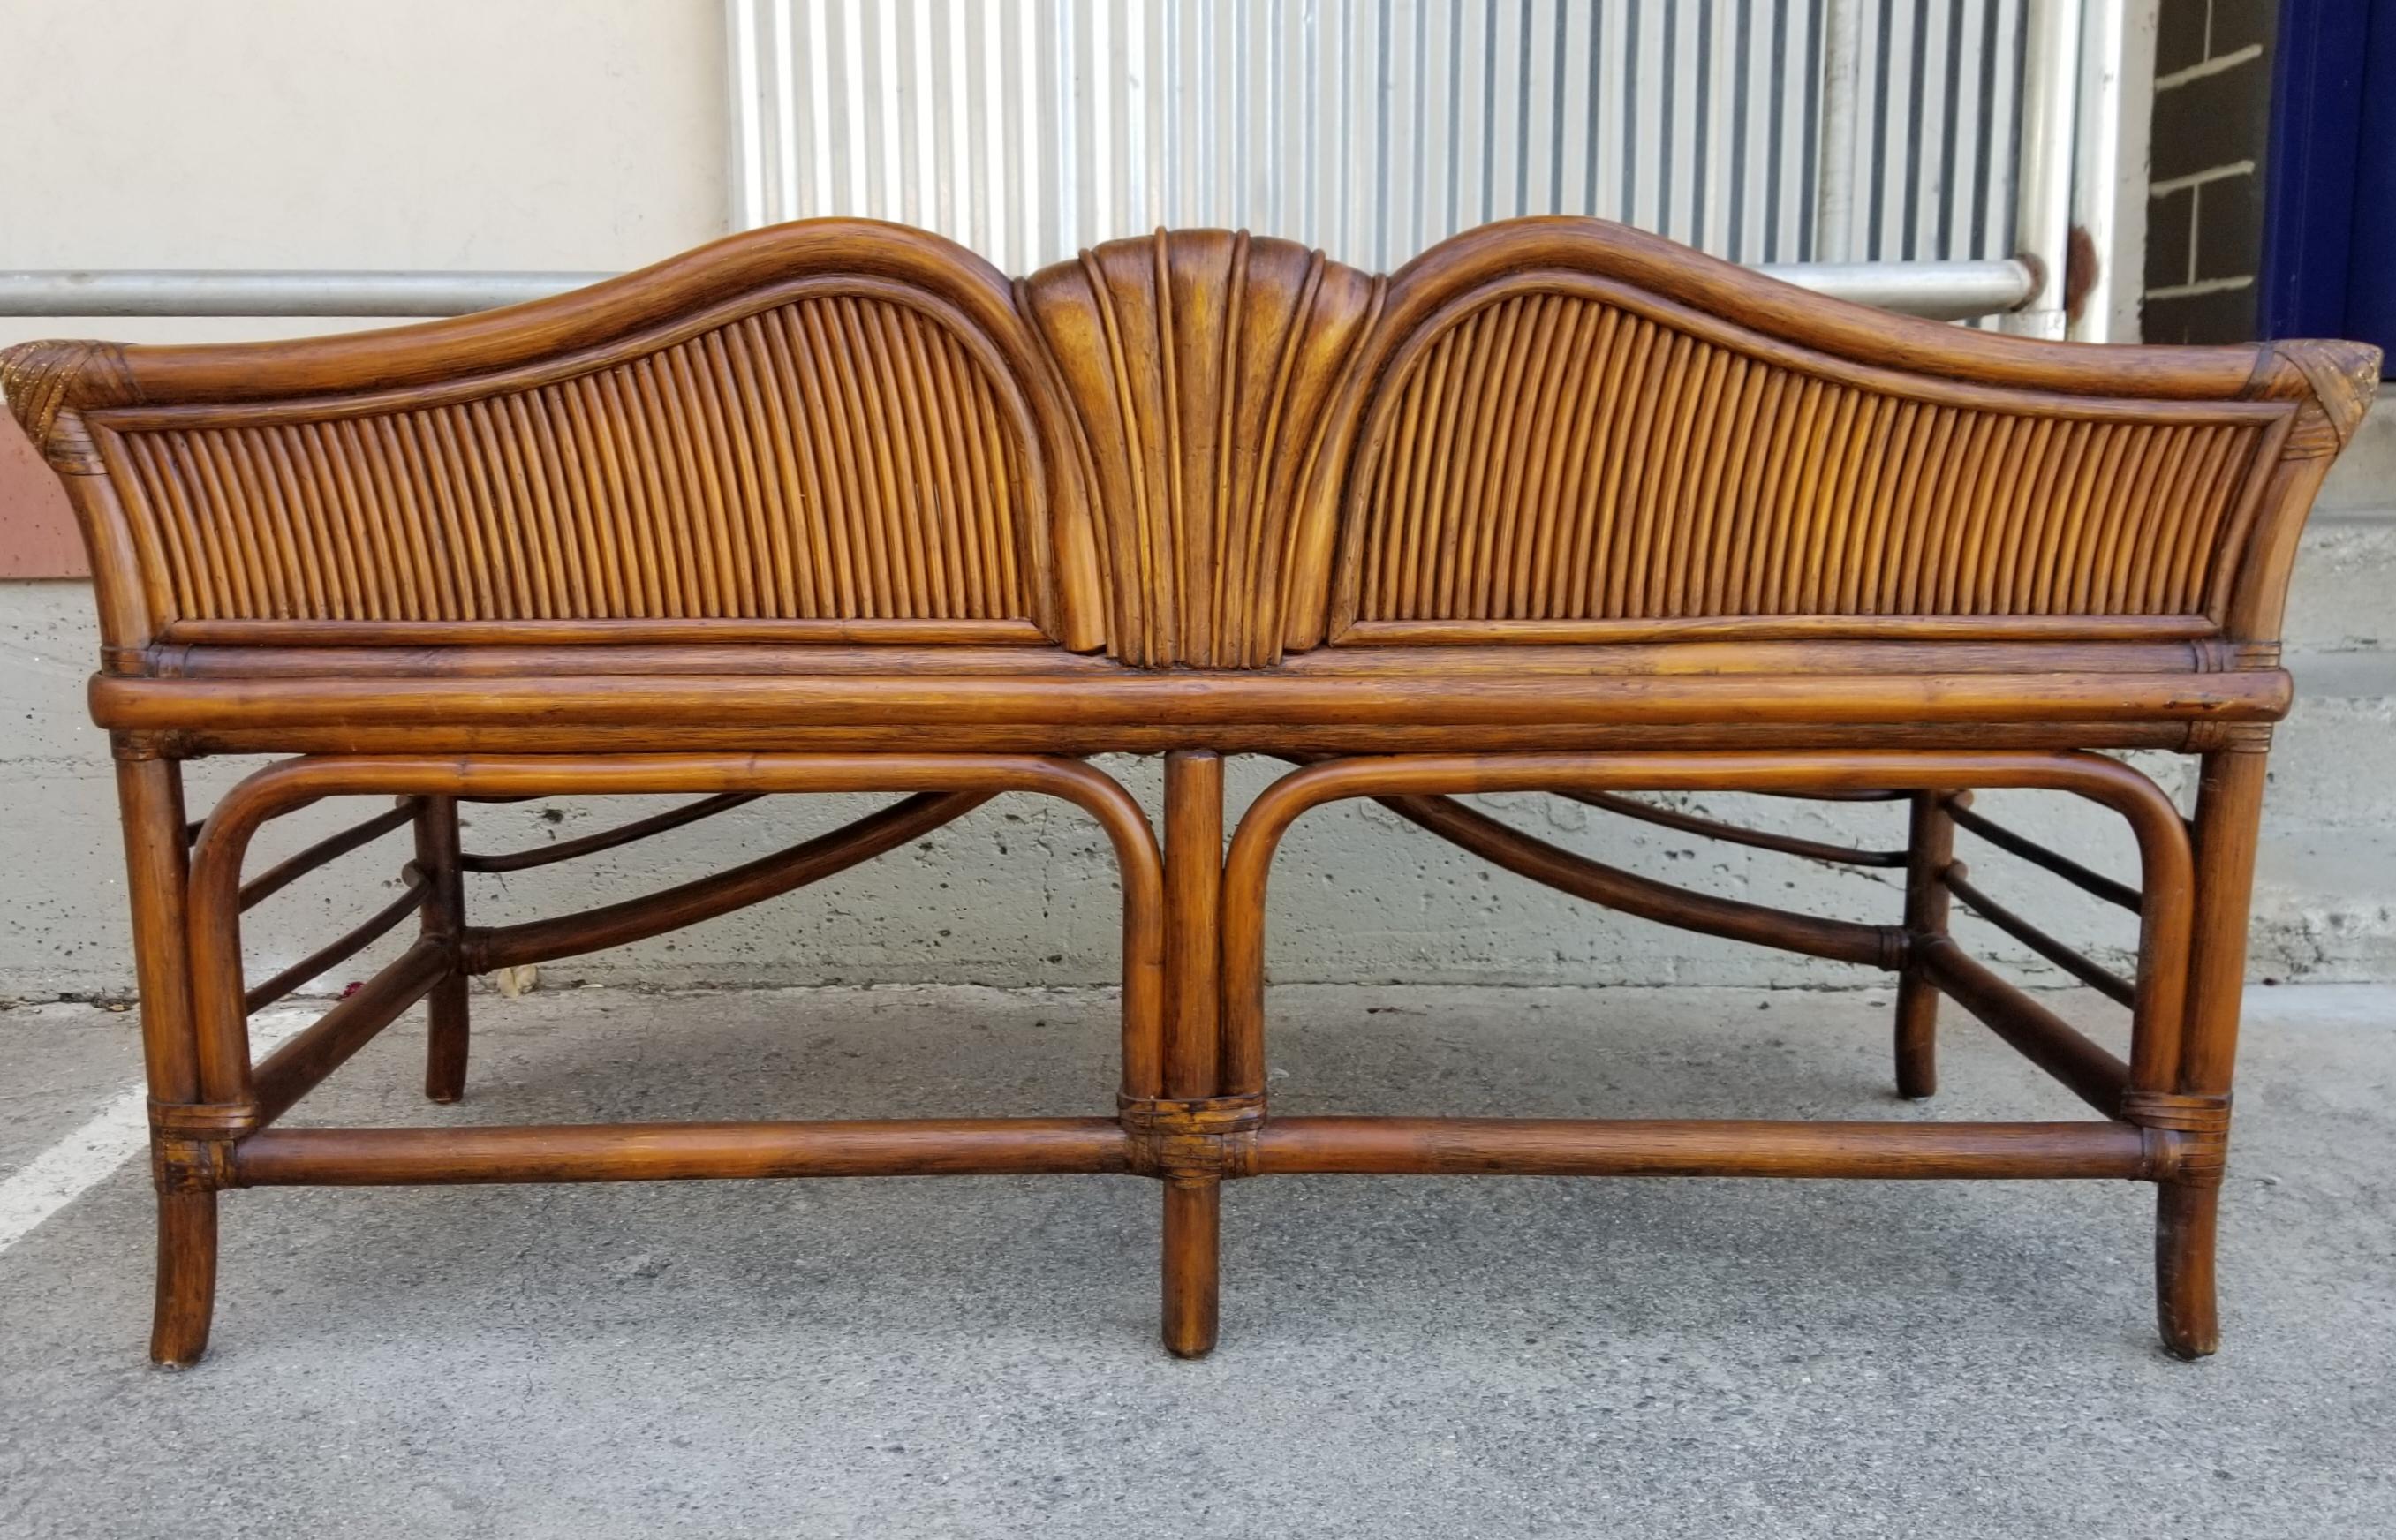 An unusual bamboo / rattan bench by Ficks Reed. Original finish and upholstery. Very good vintage condition. Structurally very sturdy.